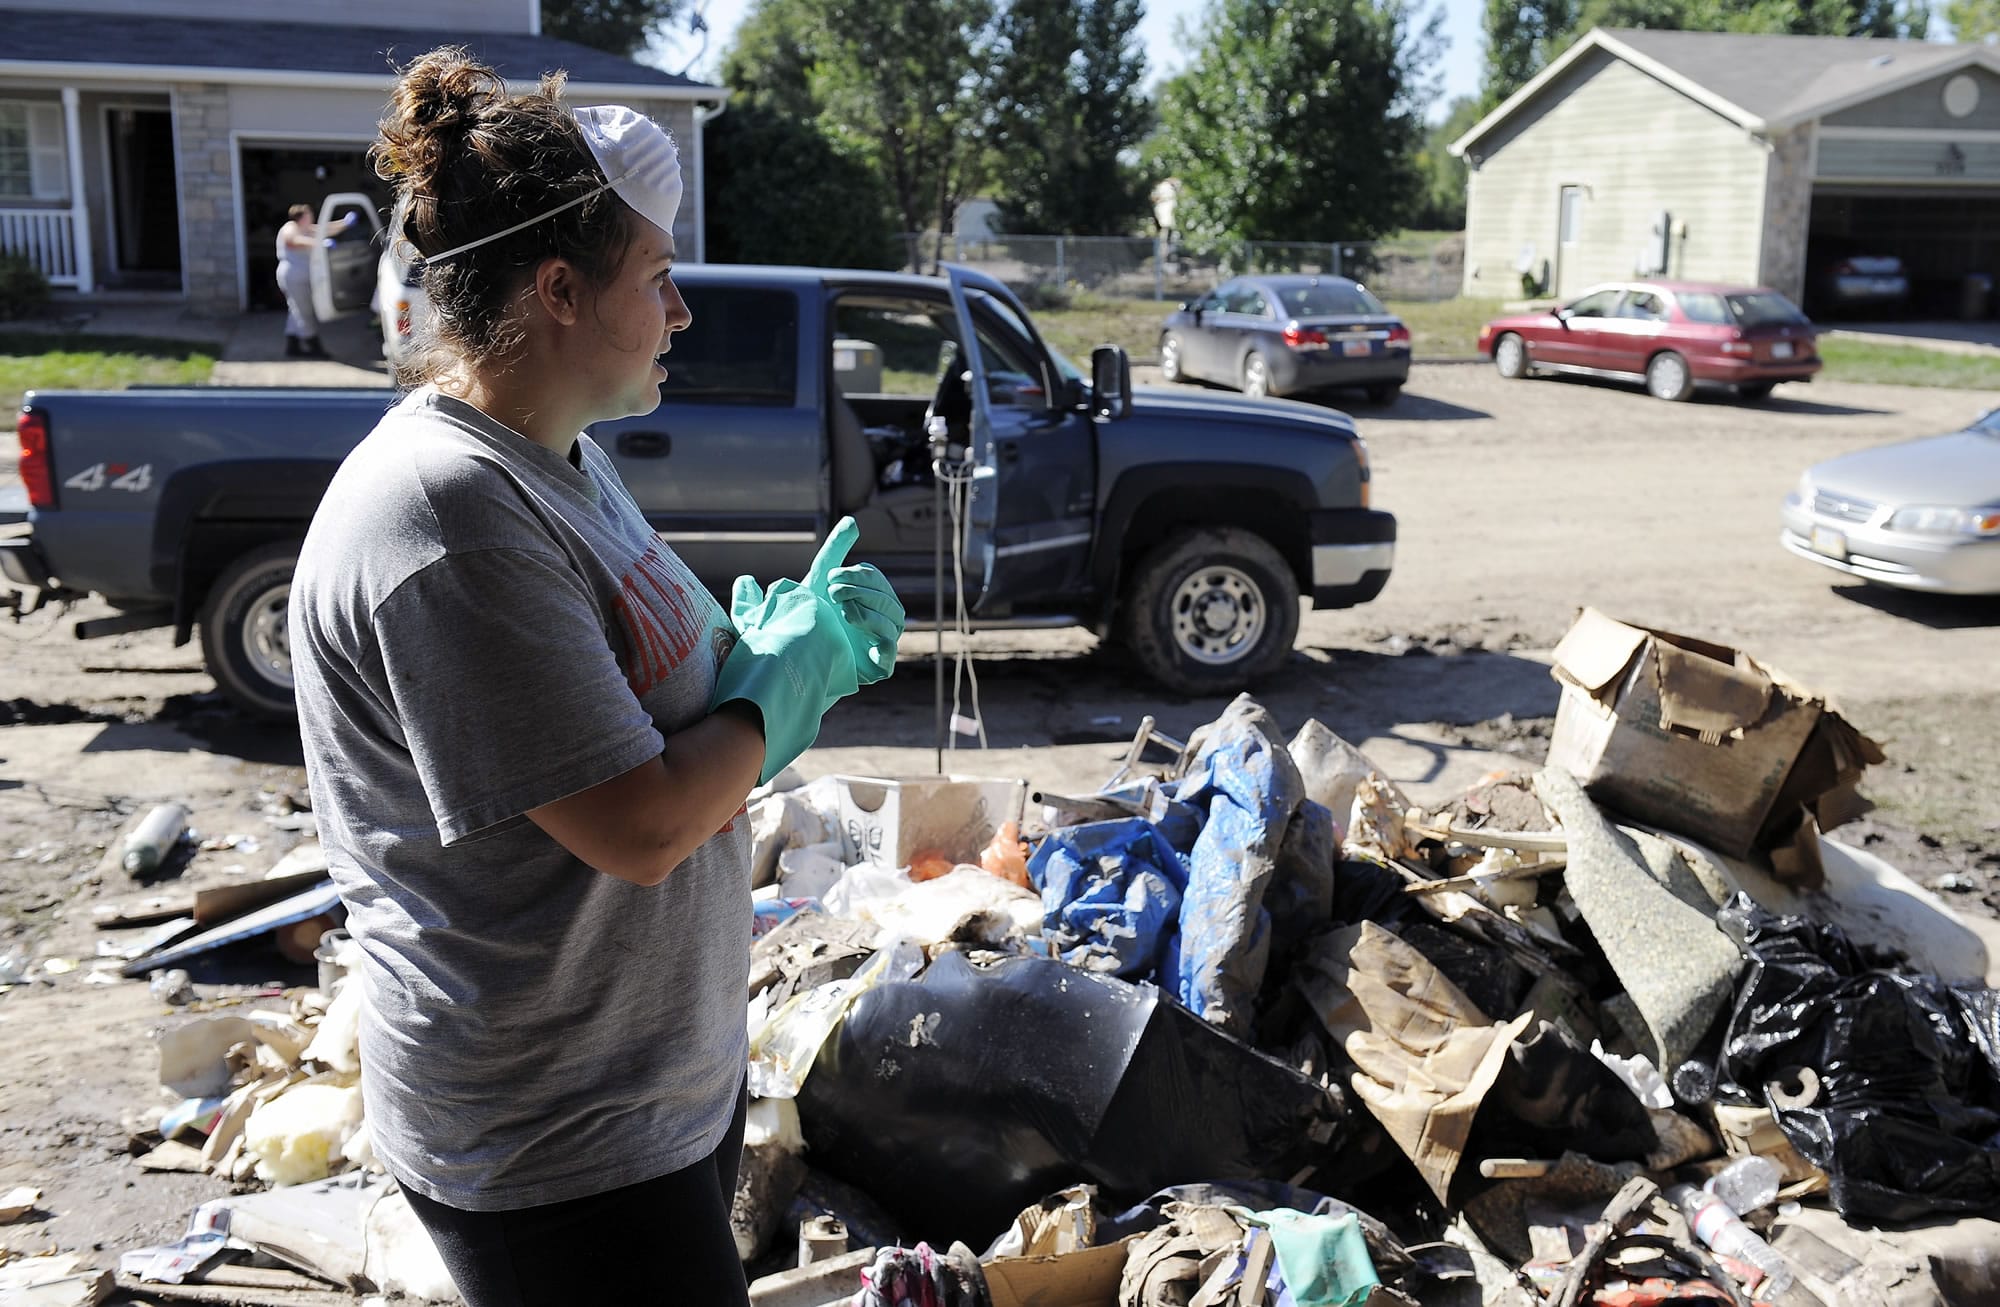 Tara Anderson, 25, takes a break from cleaning out her flood-damaged home in Evans, Colo., on Friday.